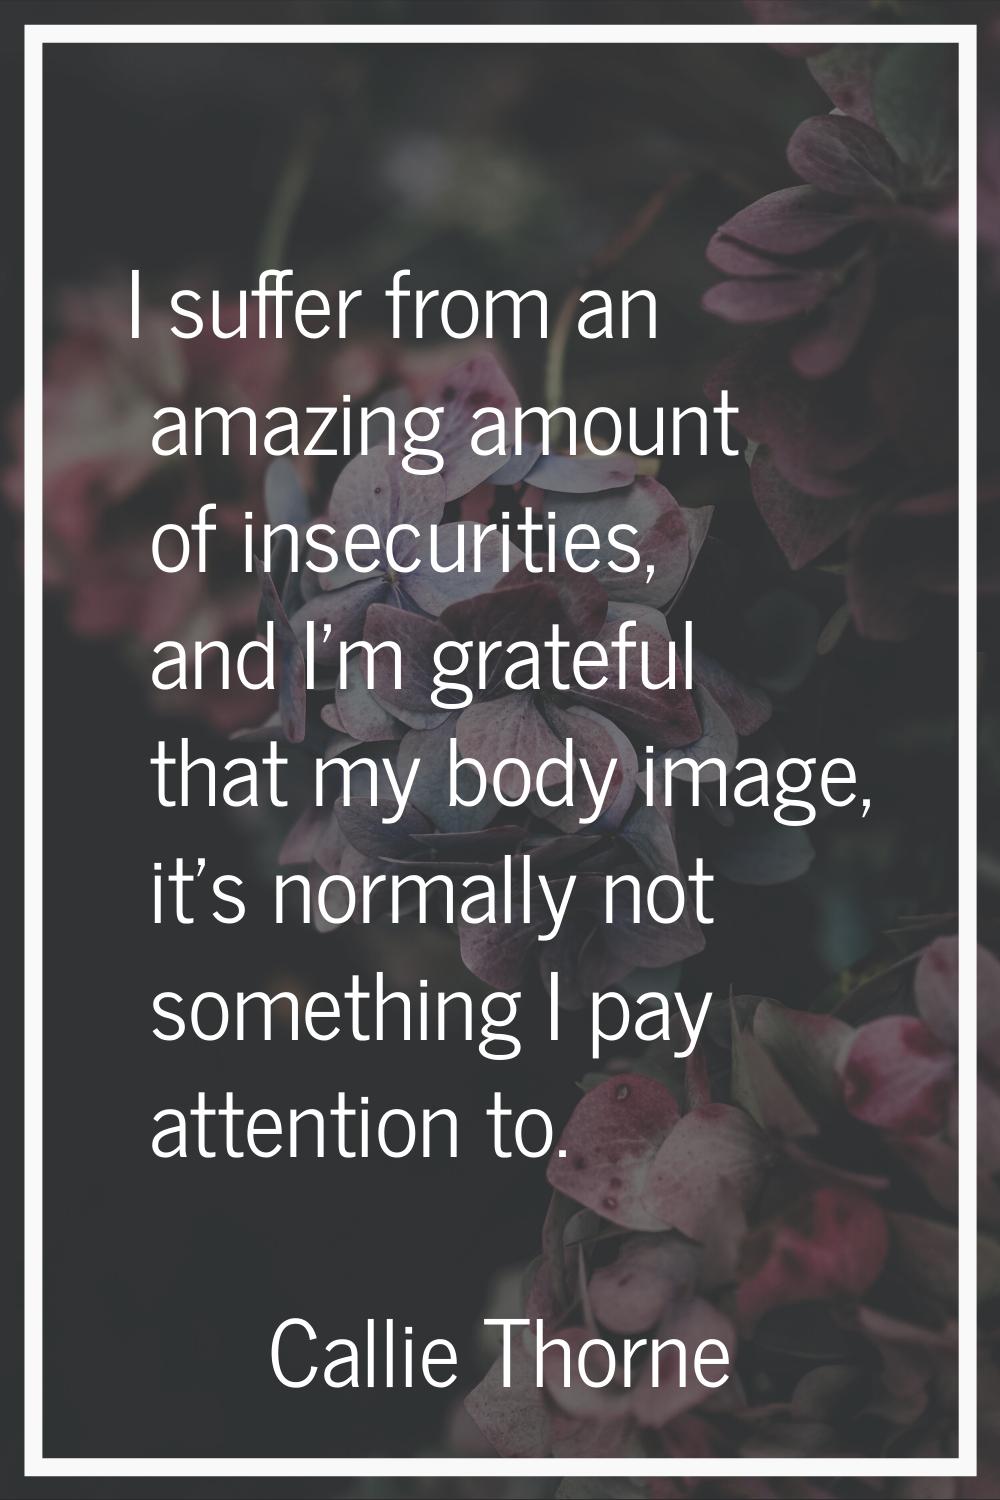 I suffer from an amazing amount of insecurities, and I'm grateful that my body image, it's normally